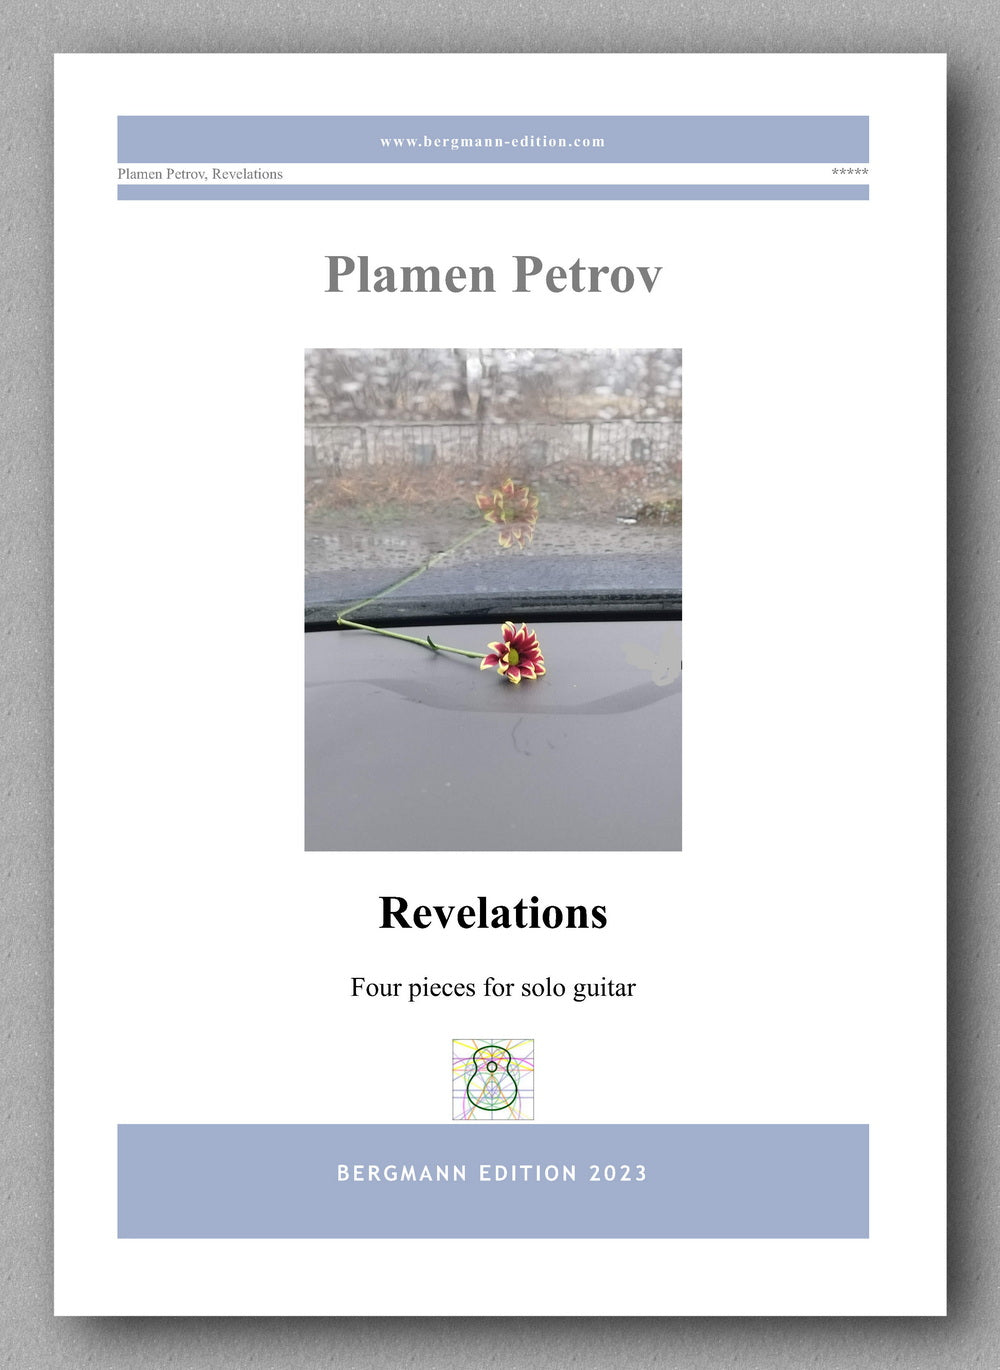 Revelations by Plamen Petrov - preview of the Cover